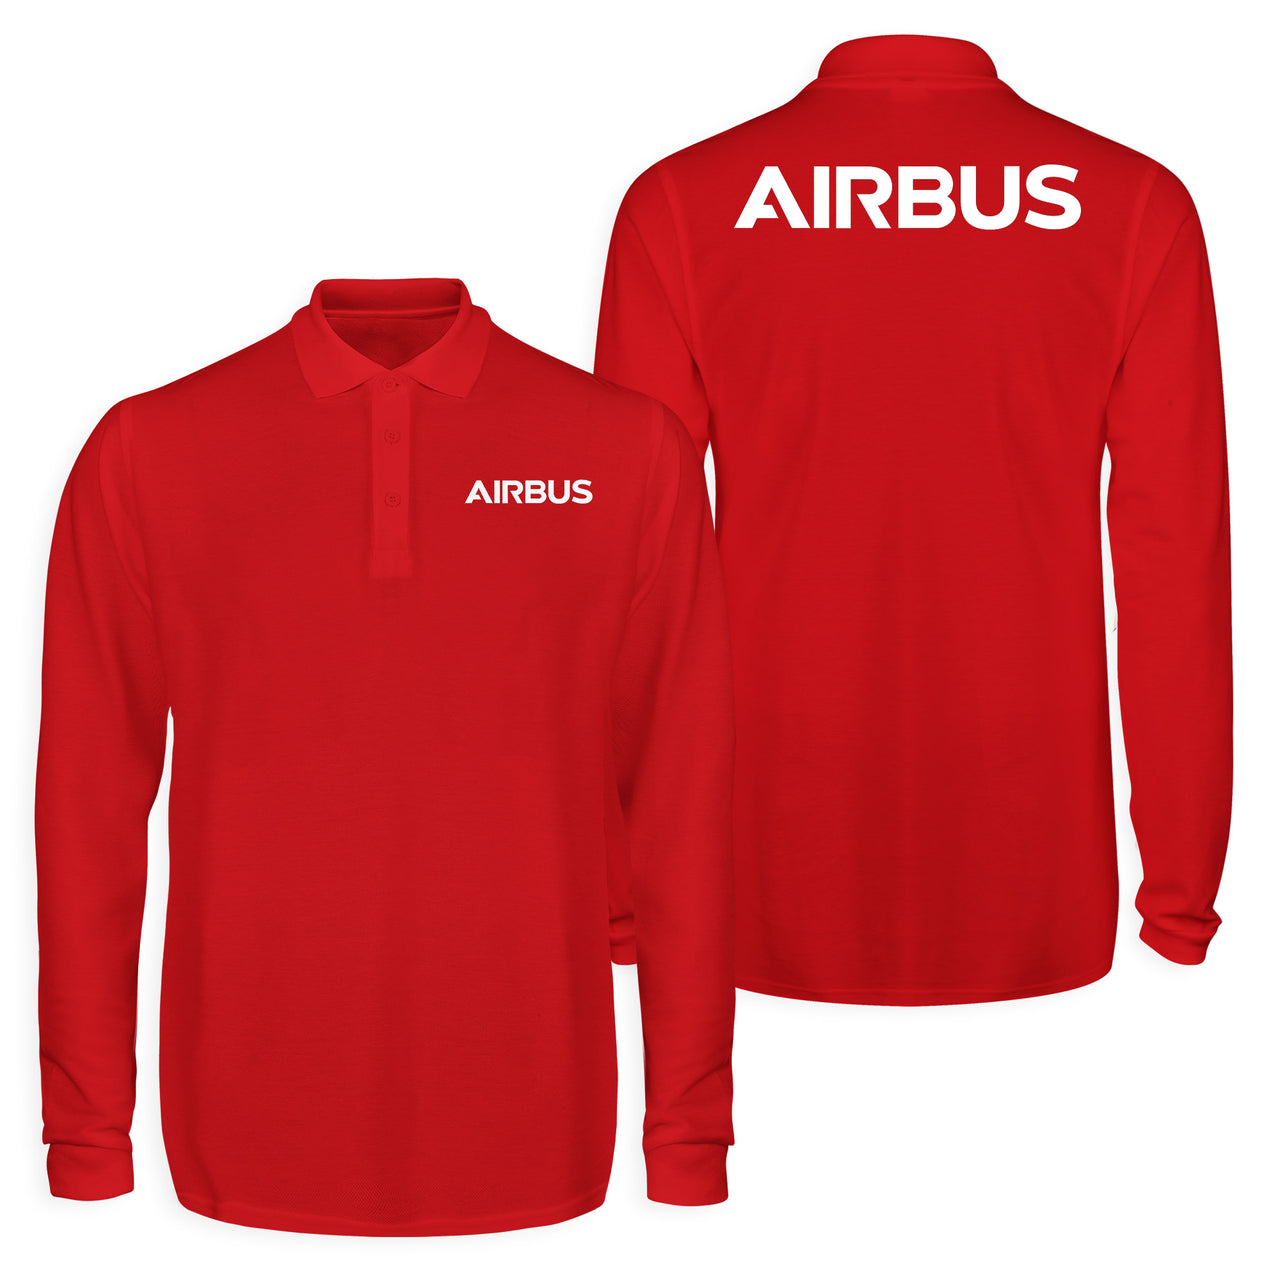 Airbus & Text Designed Long Sleeve Polo T-Shirts (Double-Side)